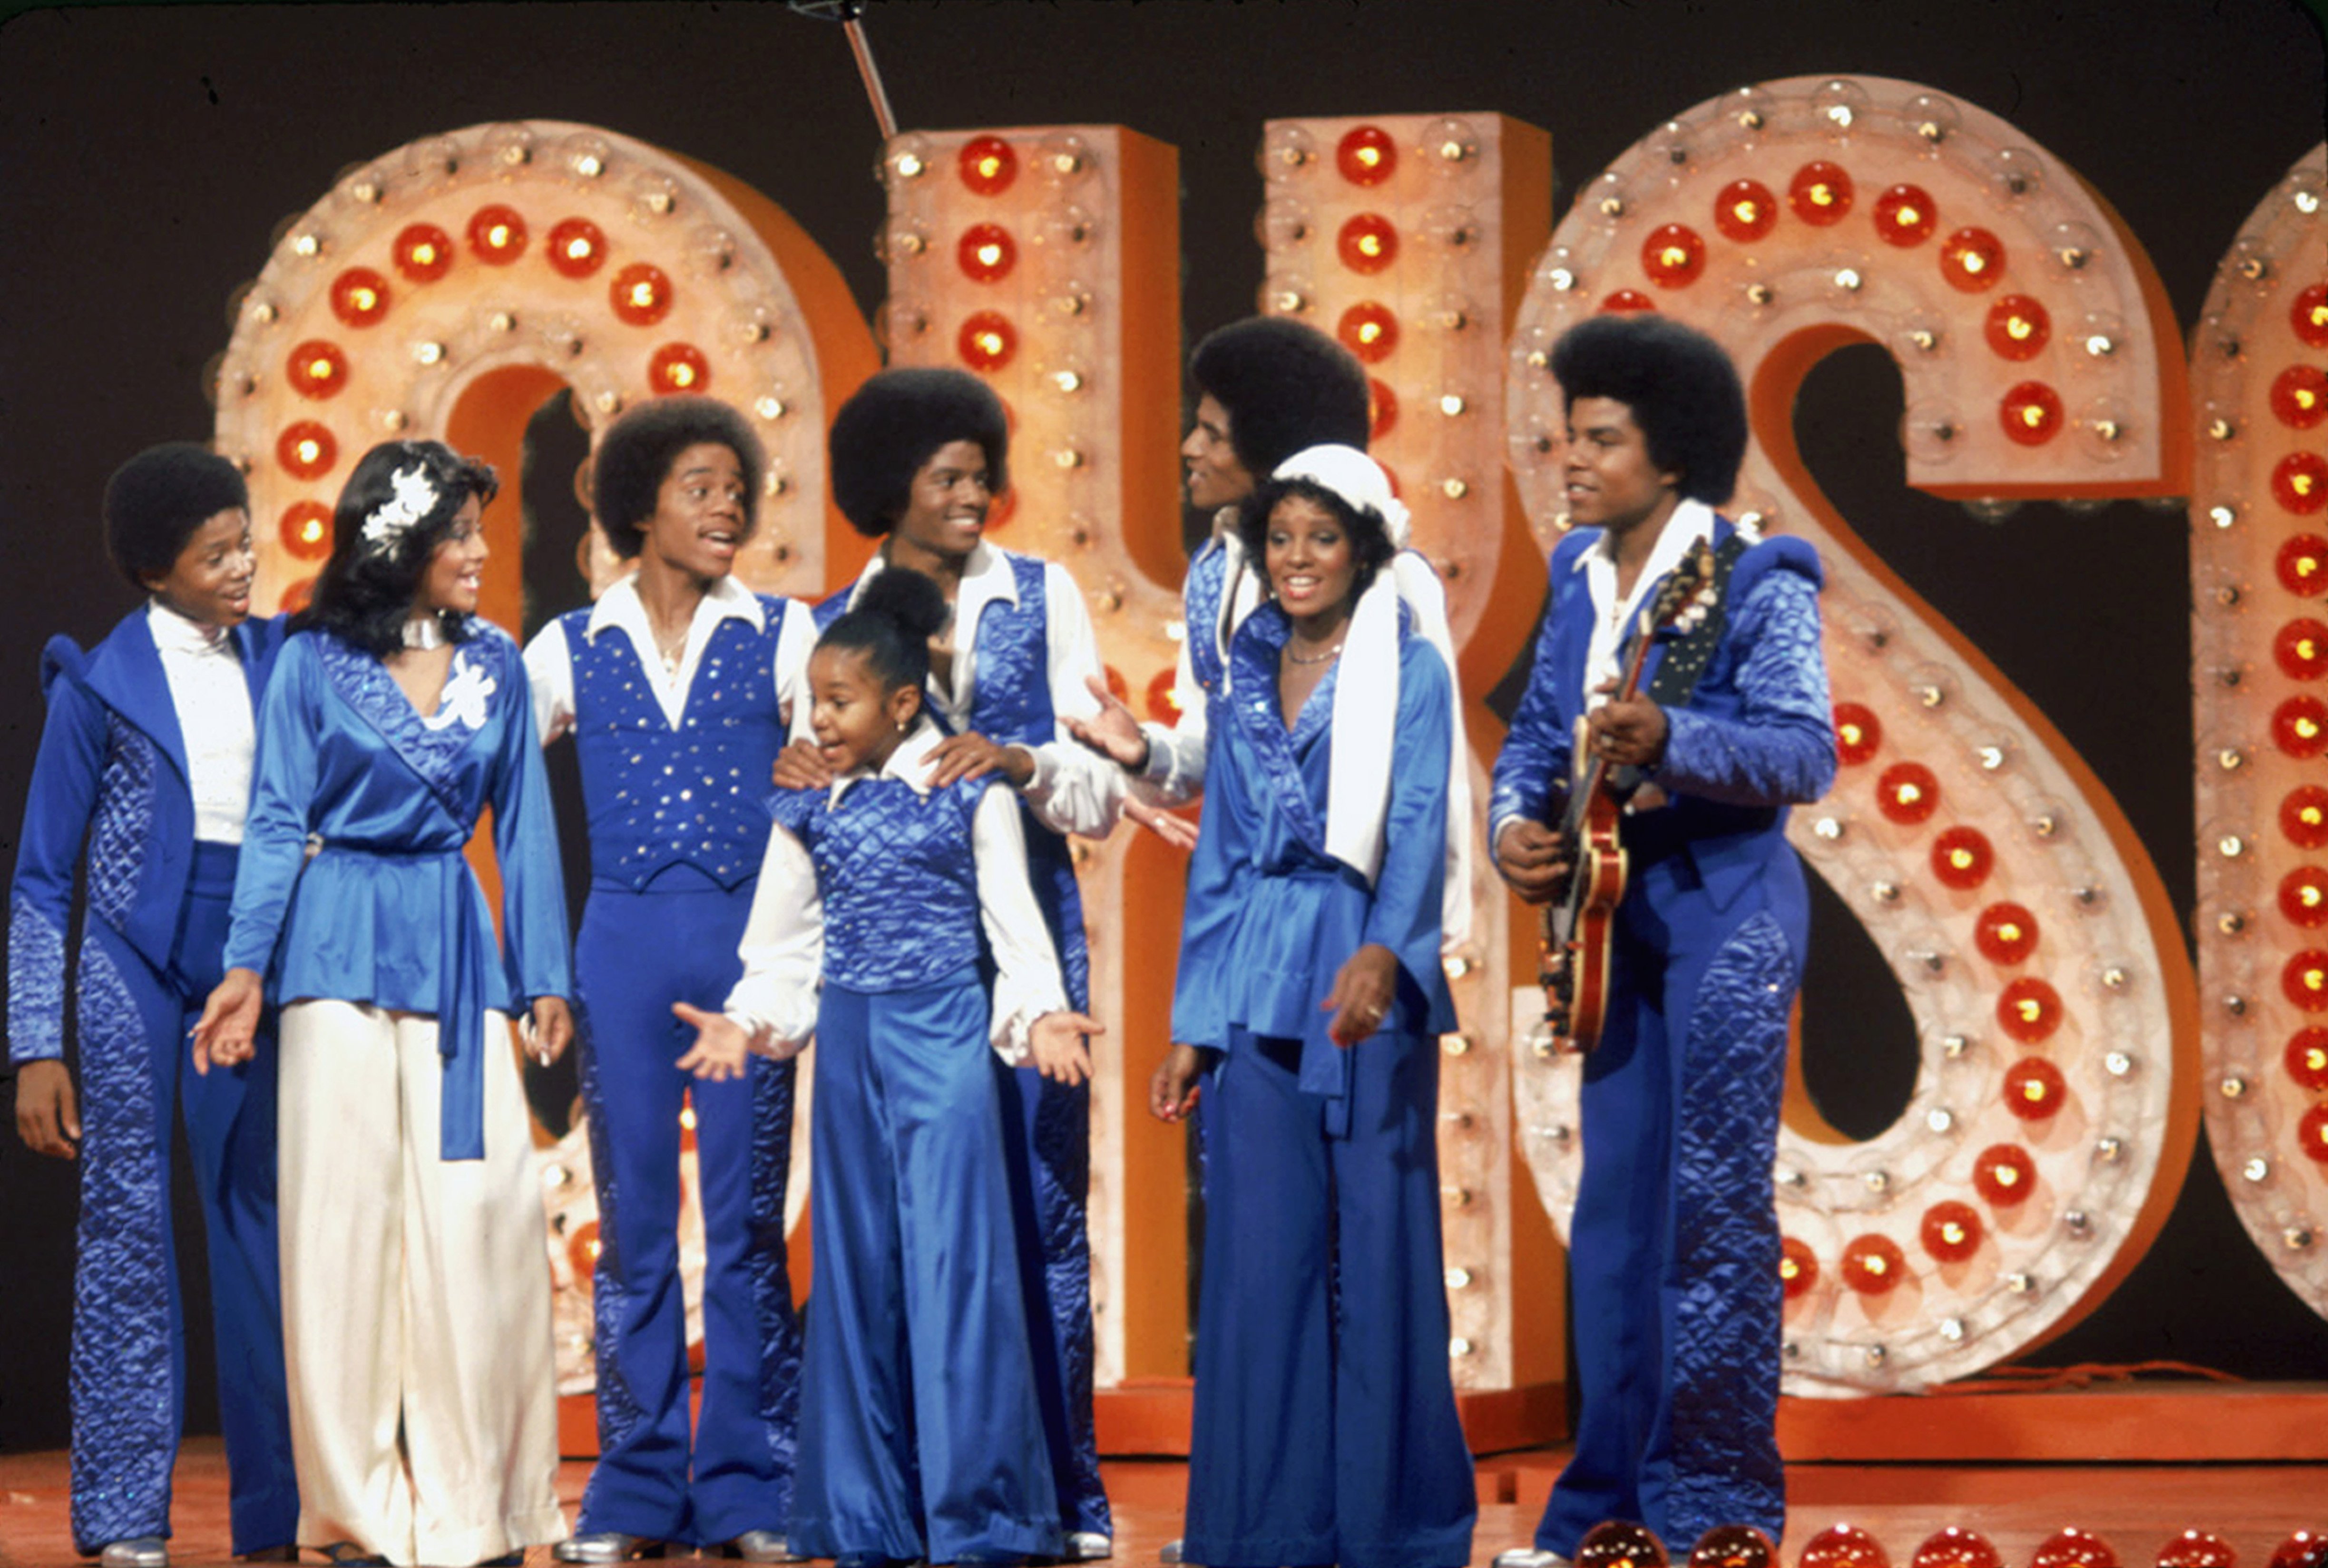 The Jackson family film a tv show at Burbank Studios, California, 13th November 1976. From left to right, Randy, La Toya, Marlon, Janet, Michael (1958 - 2009), Jackie, Rebbie and Tito | Photo: Getty Images